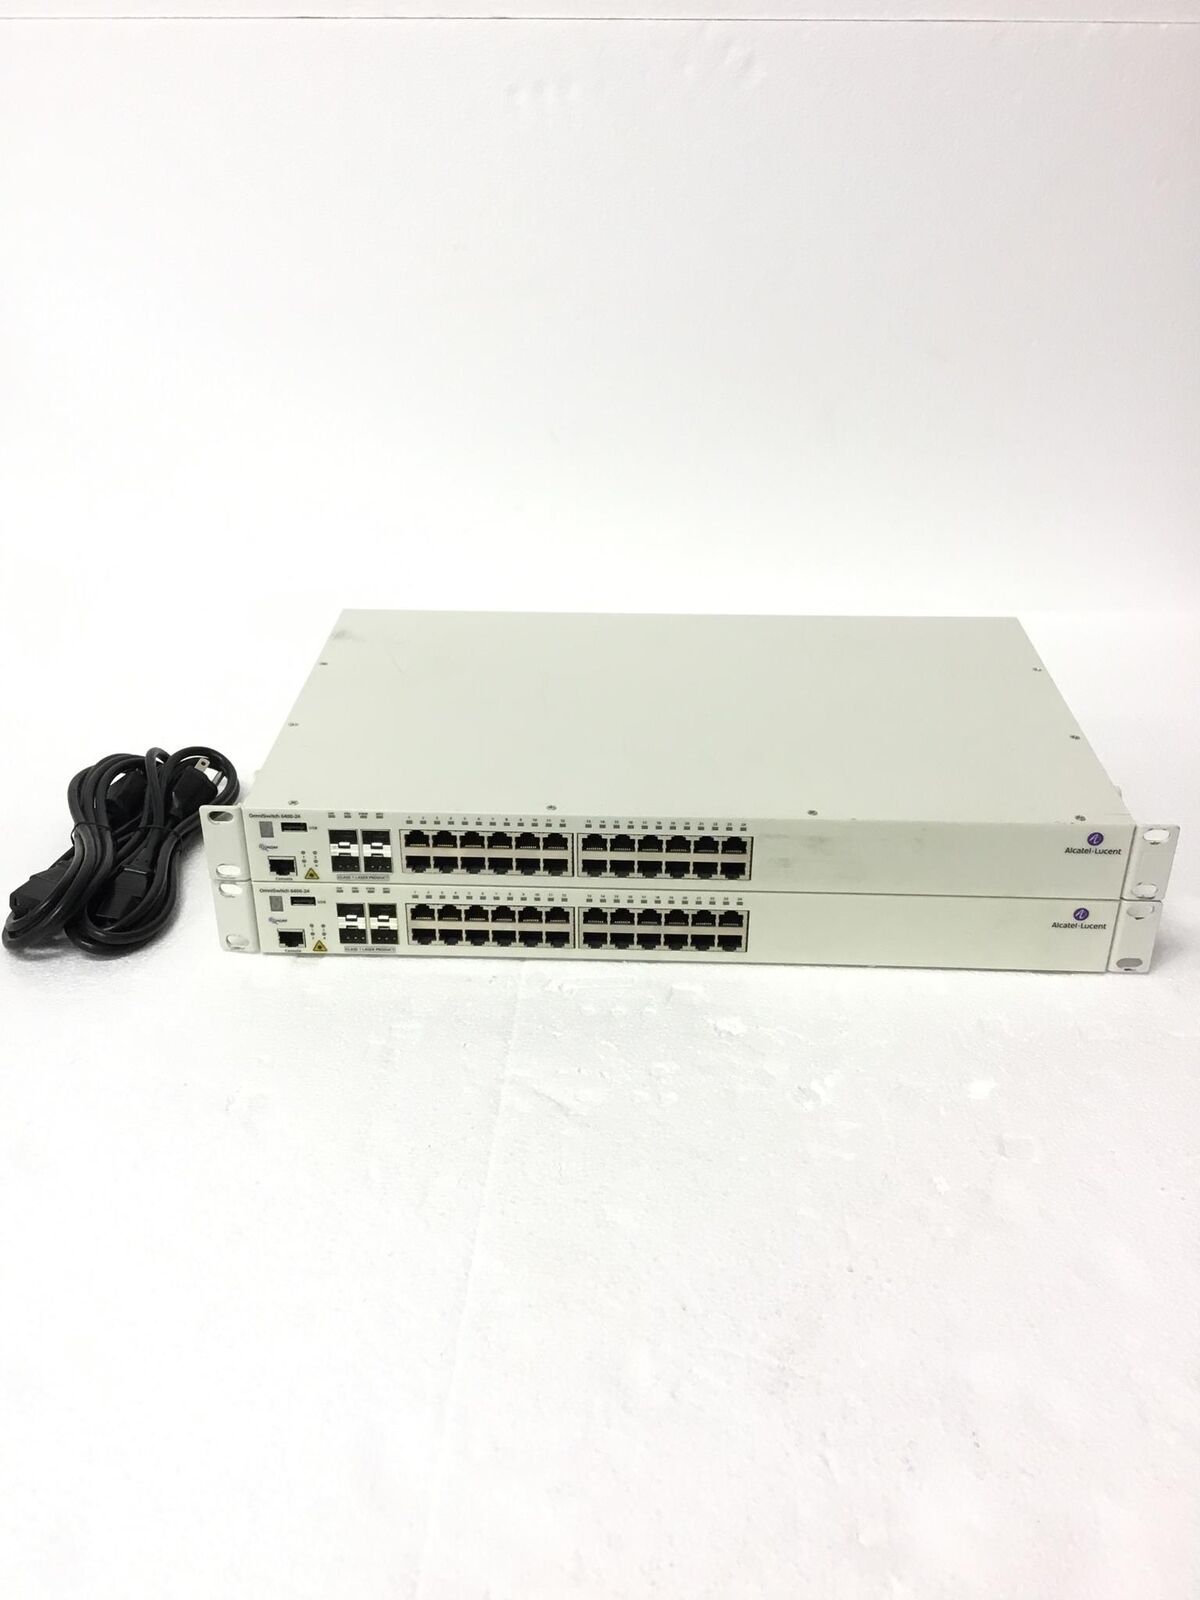 LOT OF 2 ALCATEL LUCENT Omni Stack LS 6224 24 Network Switch w/Rack Ear FREESHIP